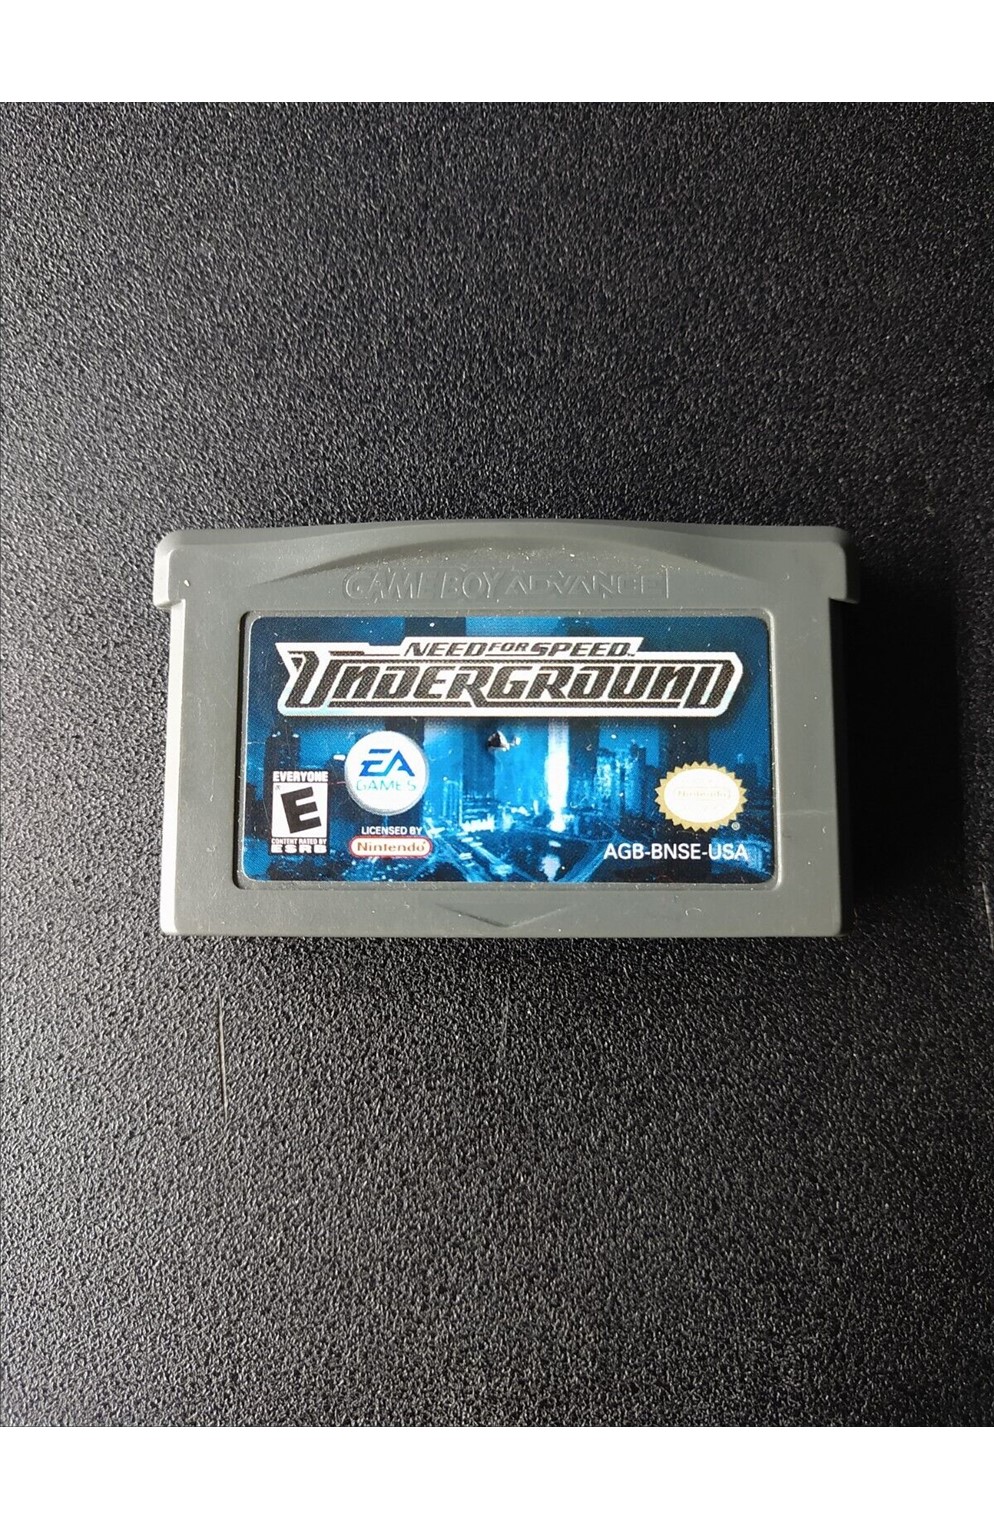 Gba Need For Speed Underground Cartrdige Only